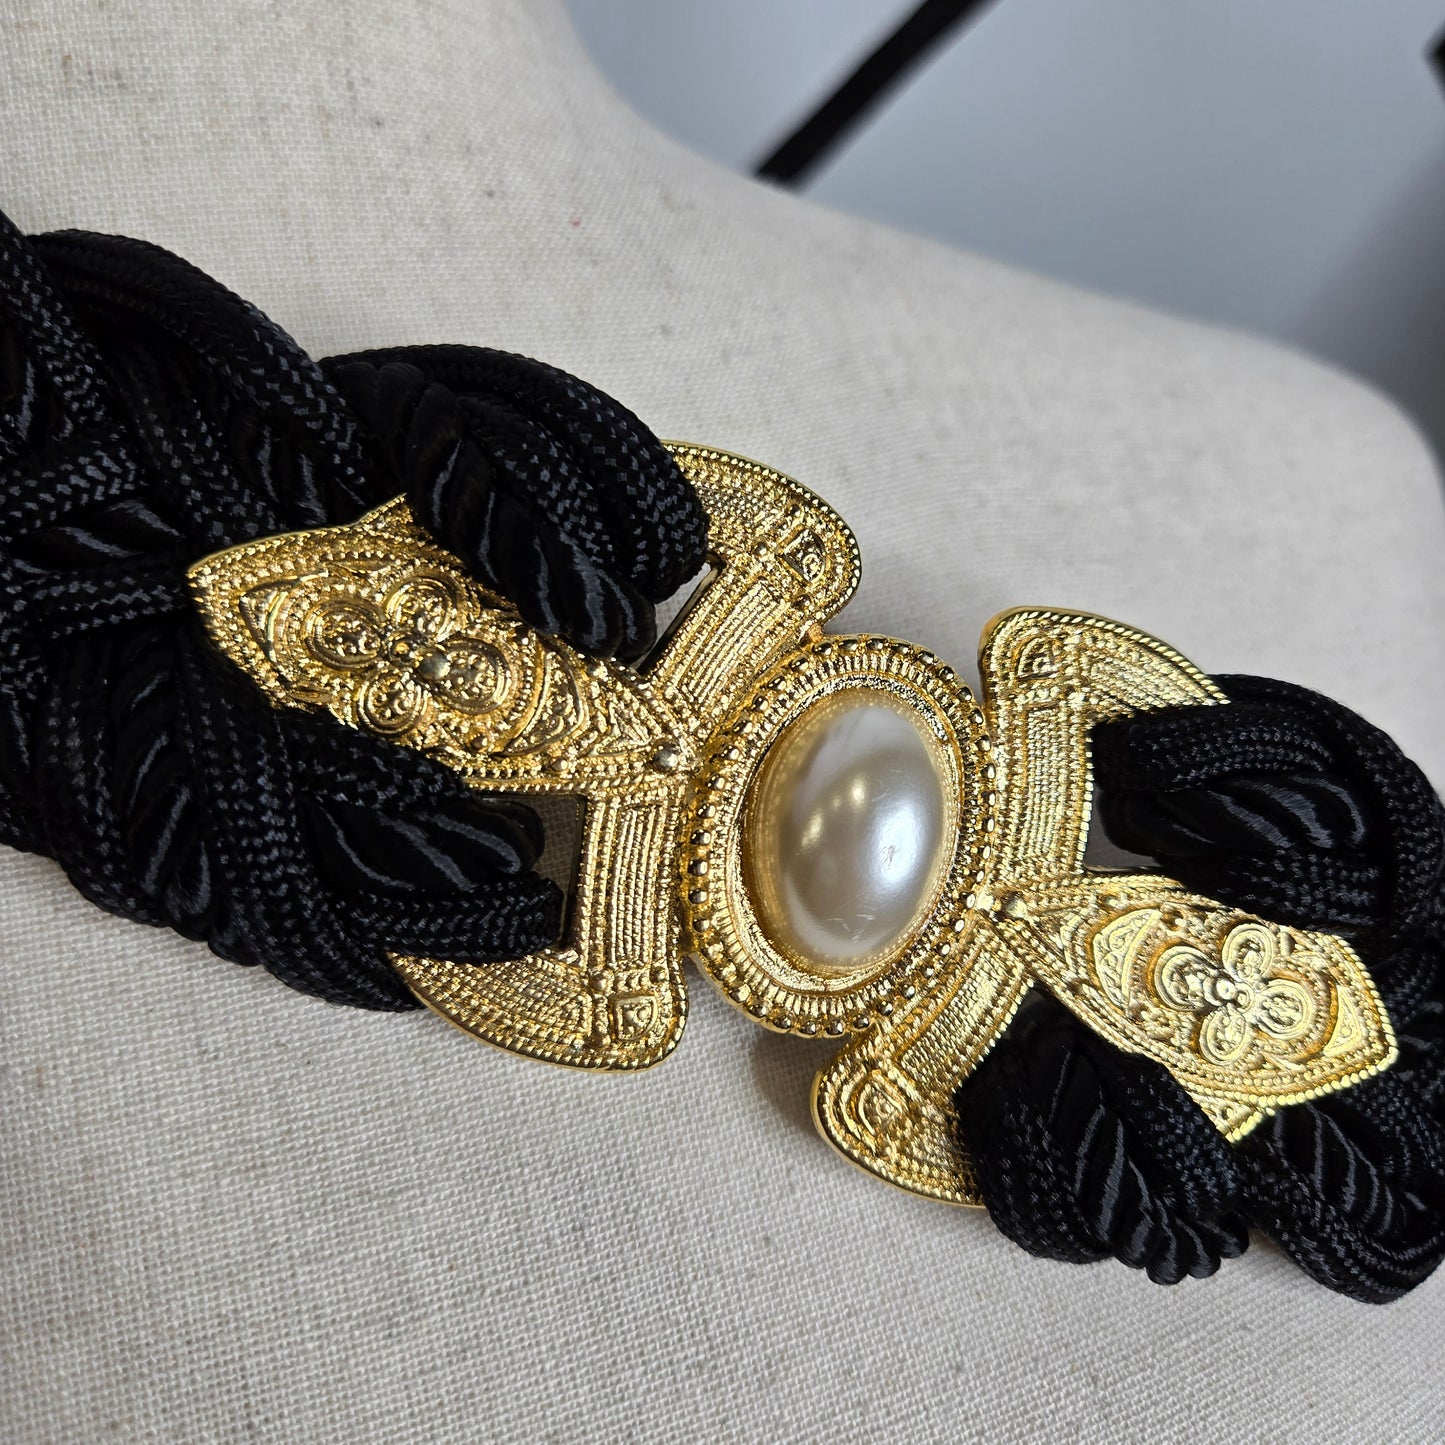 Vintage 80s Motion East Black Rope Belt with Gold and Pearl Accent - S/M